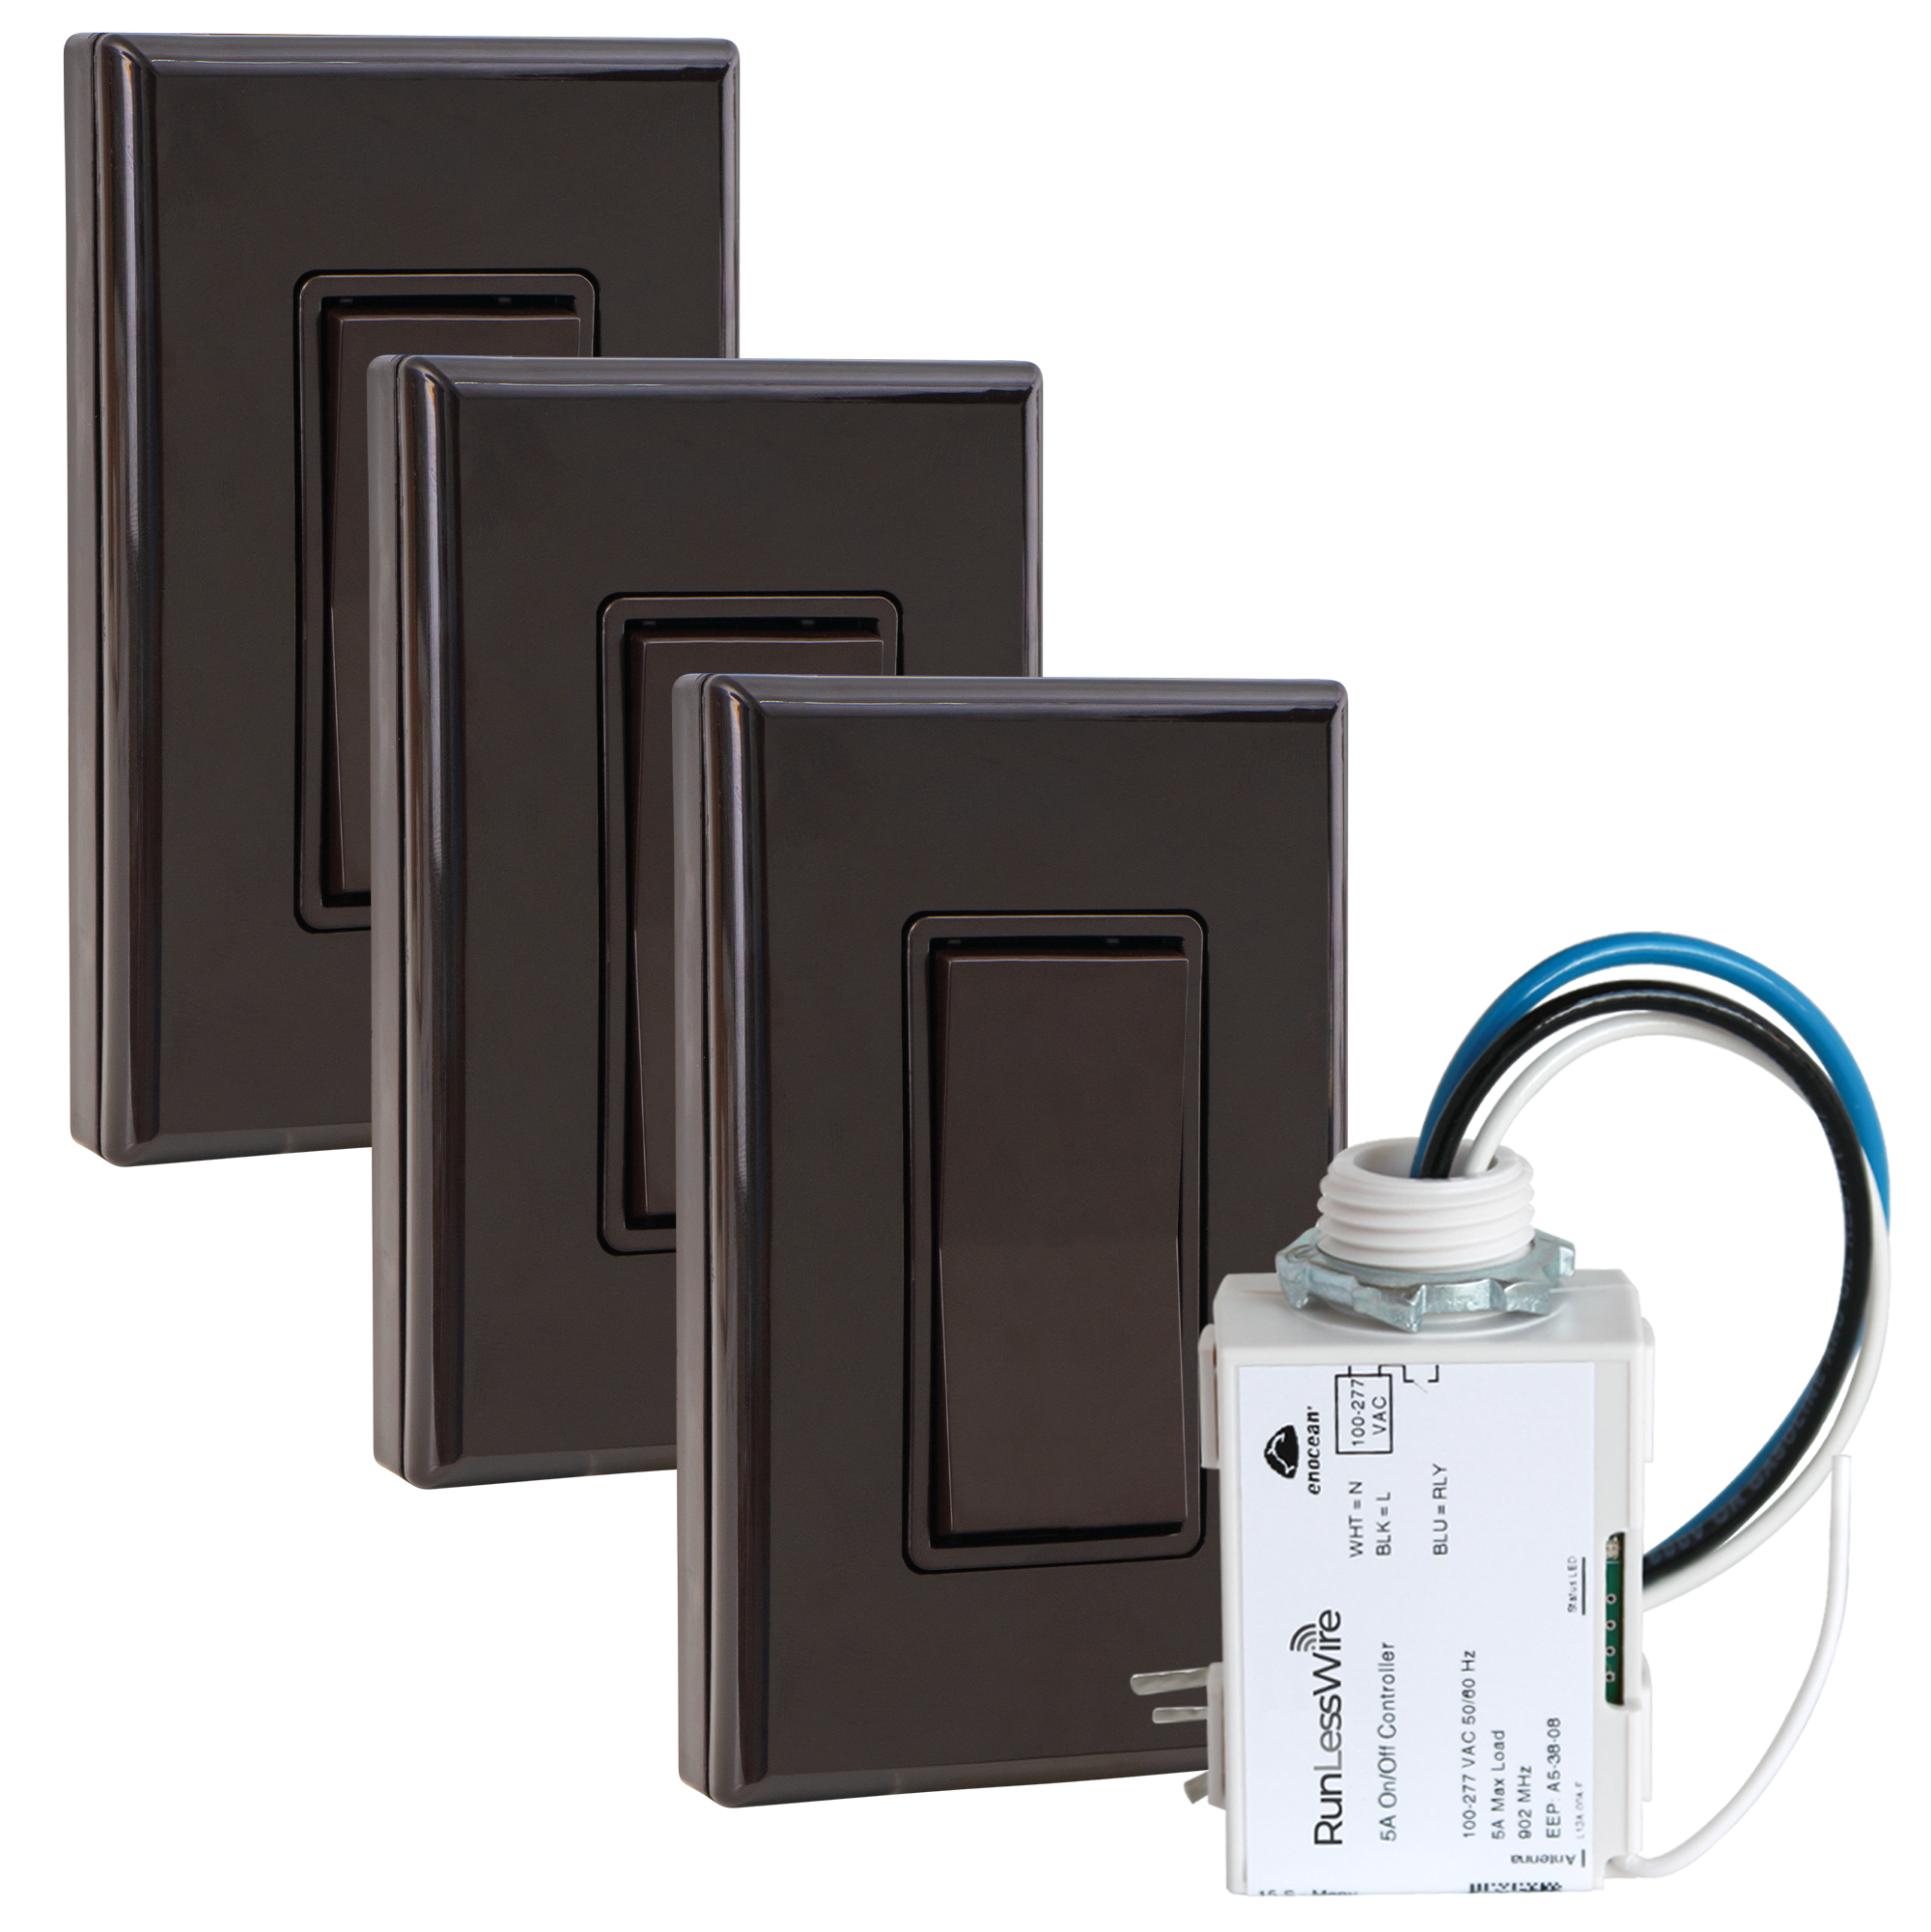 4-way Wireless Light Switch Kit – 1 Controller, 3 Light Switches